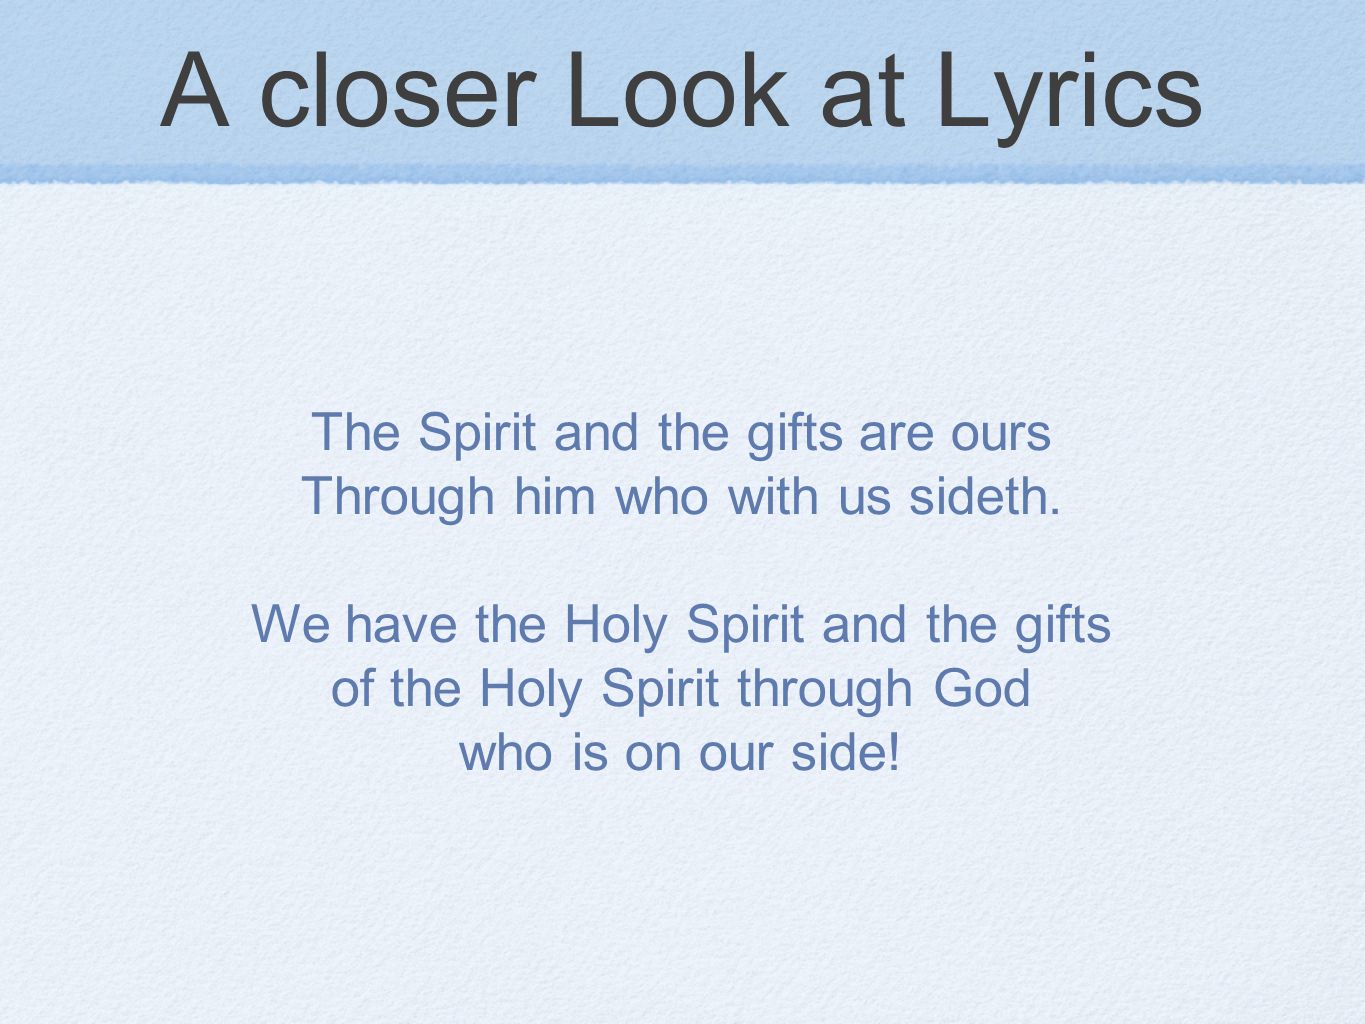 A closer Look at Lyrics The Spirit and the gifts are ours Through him who with us sideth.